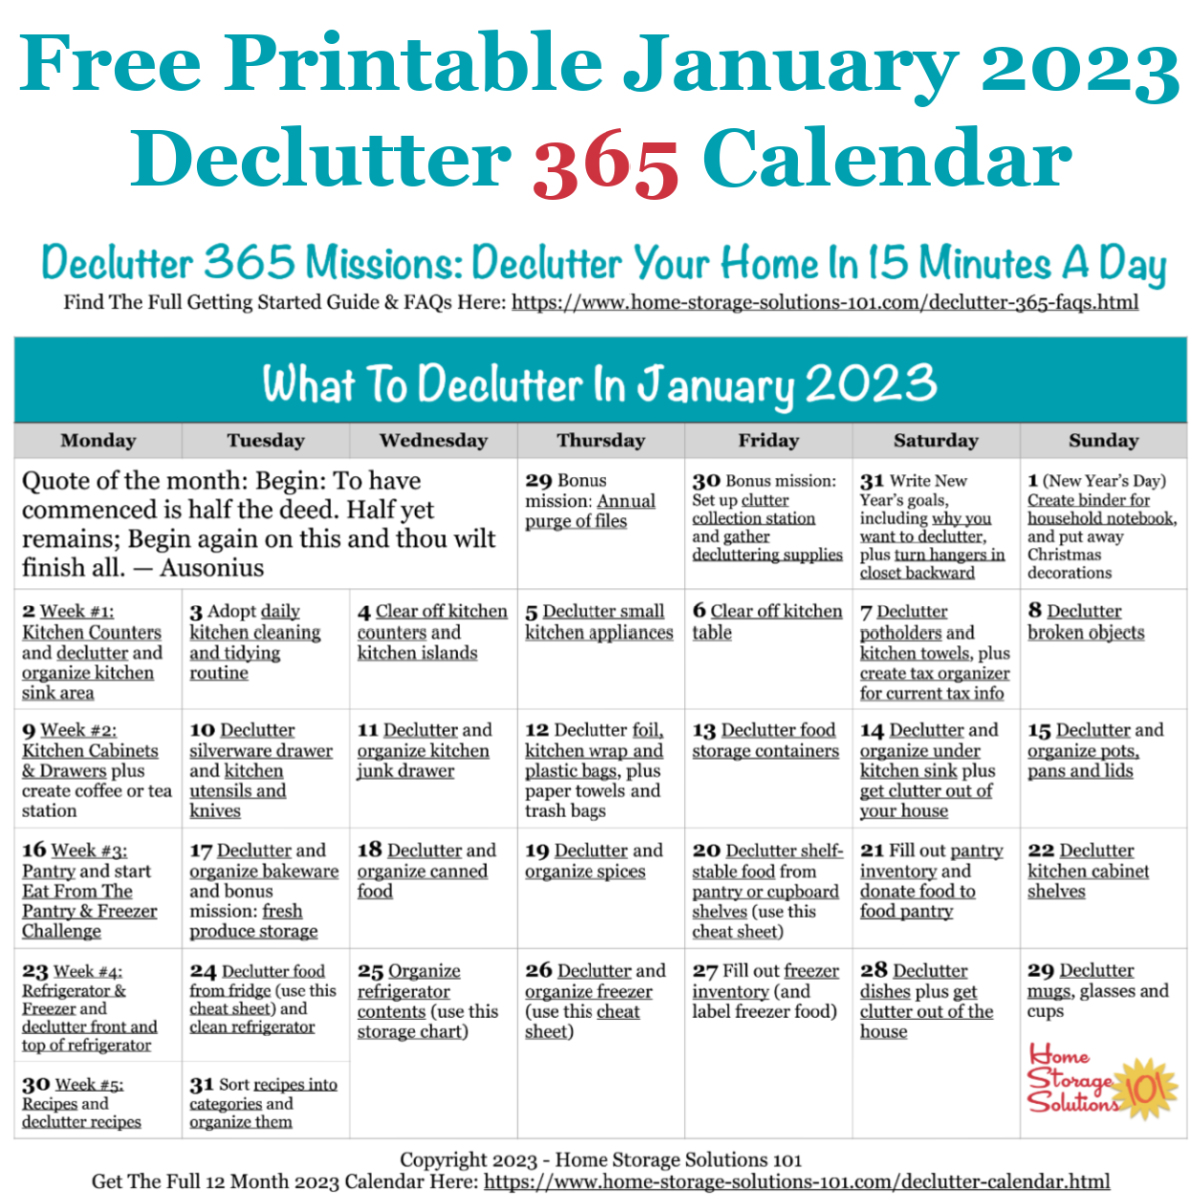 January Declutter 365 Calendar 15 Minute Daily Missions For Month